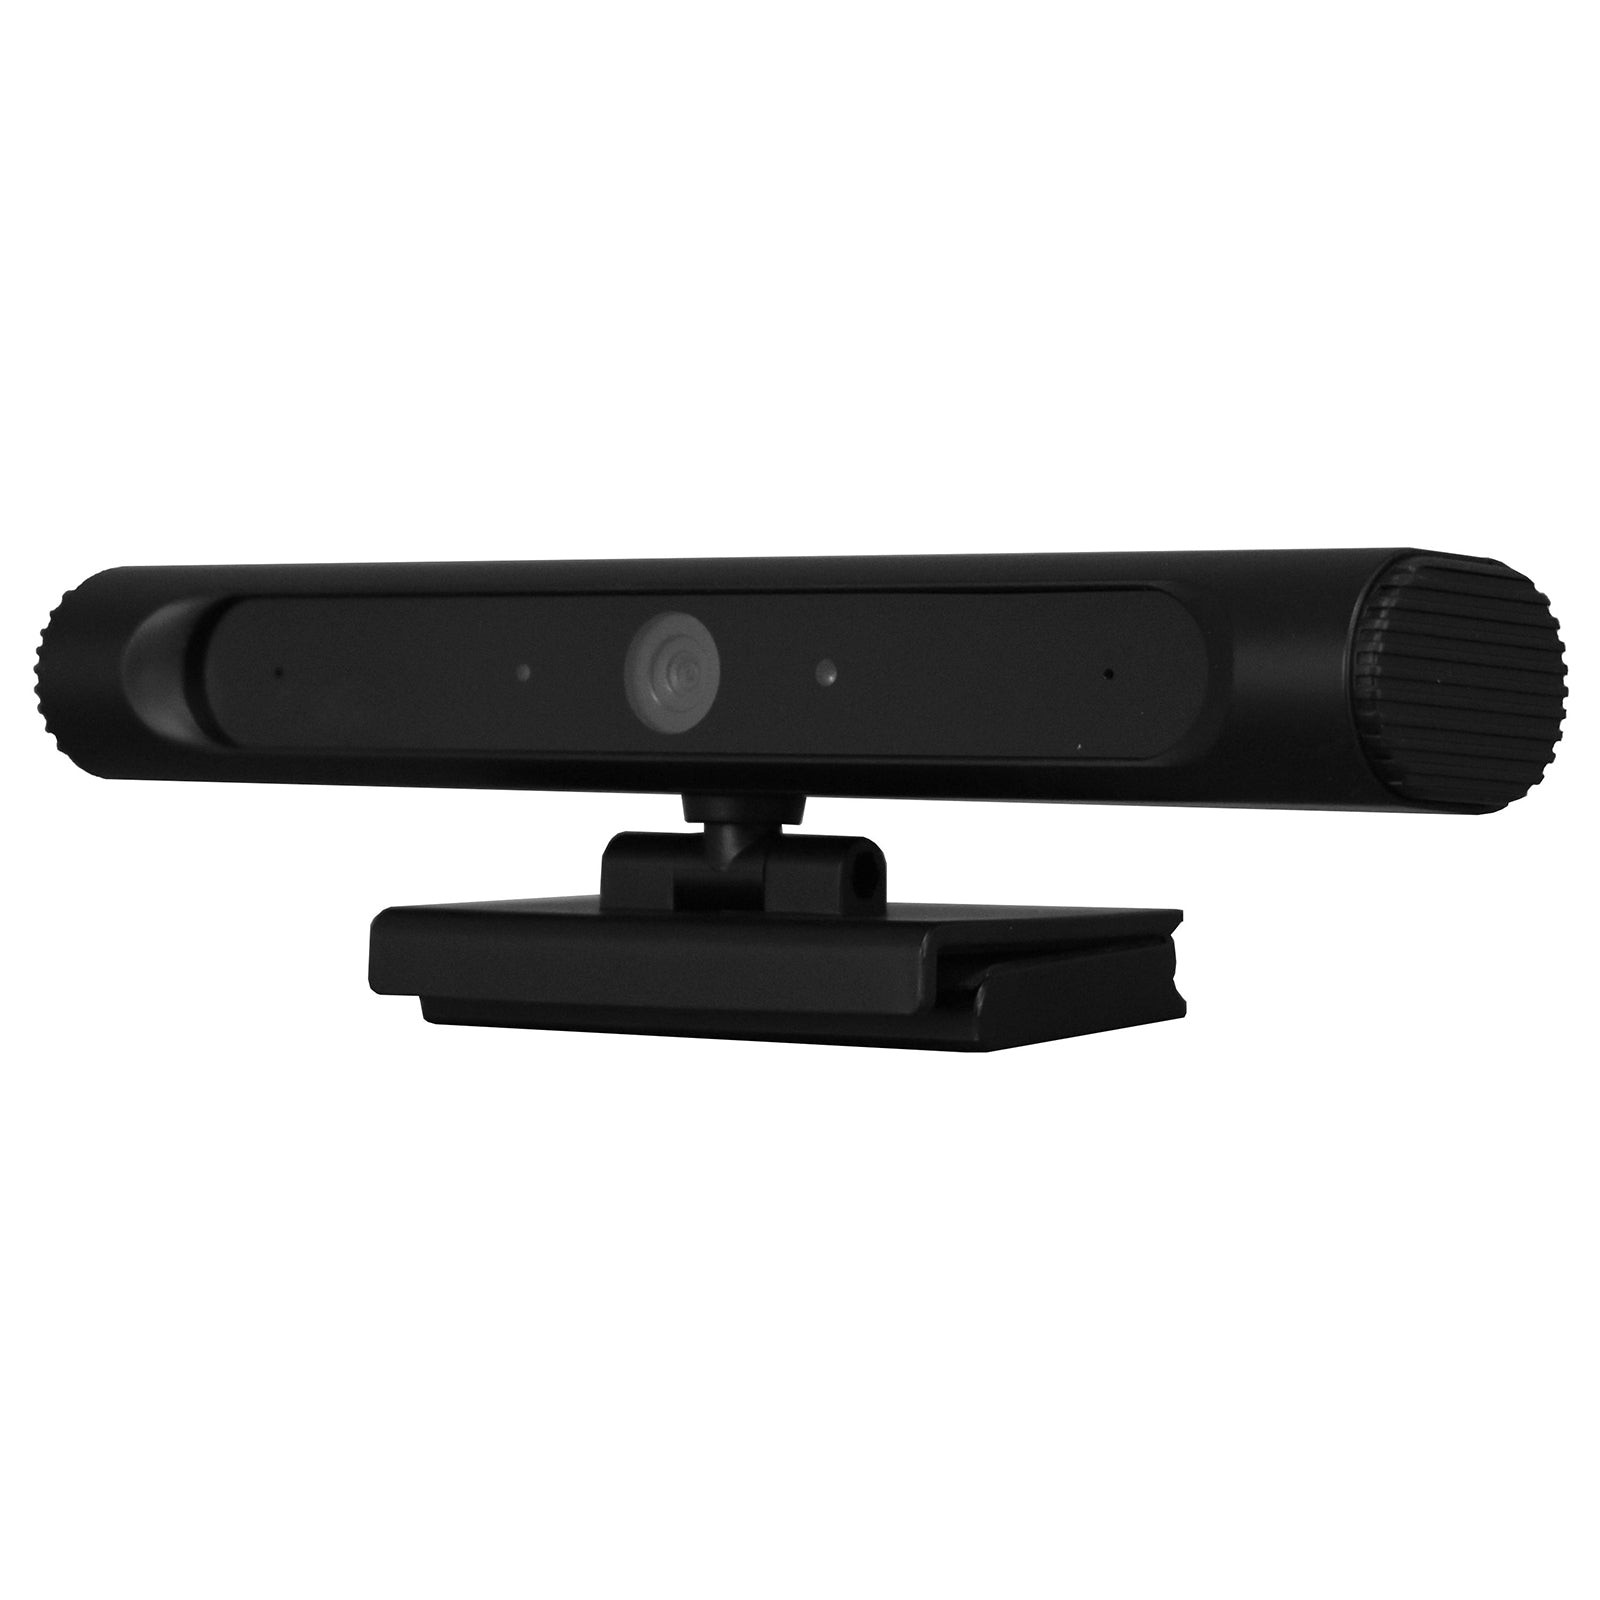 Armer C1 4K Video Conference Camera